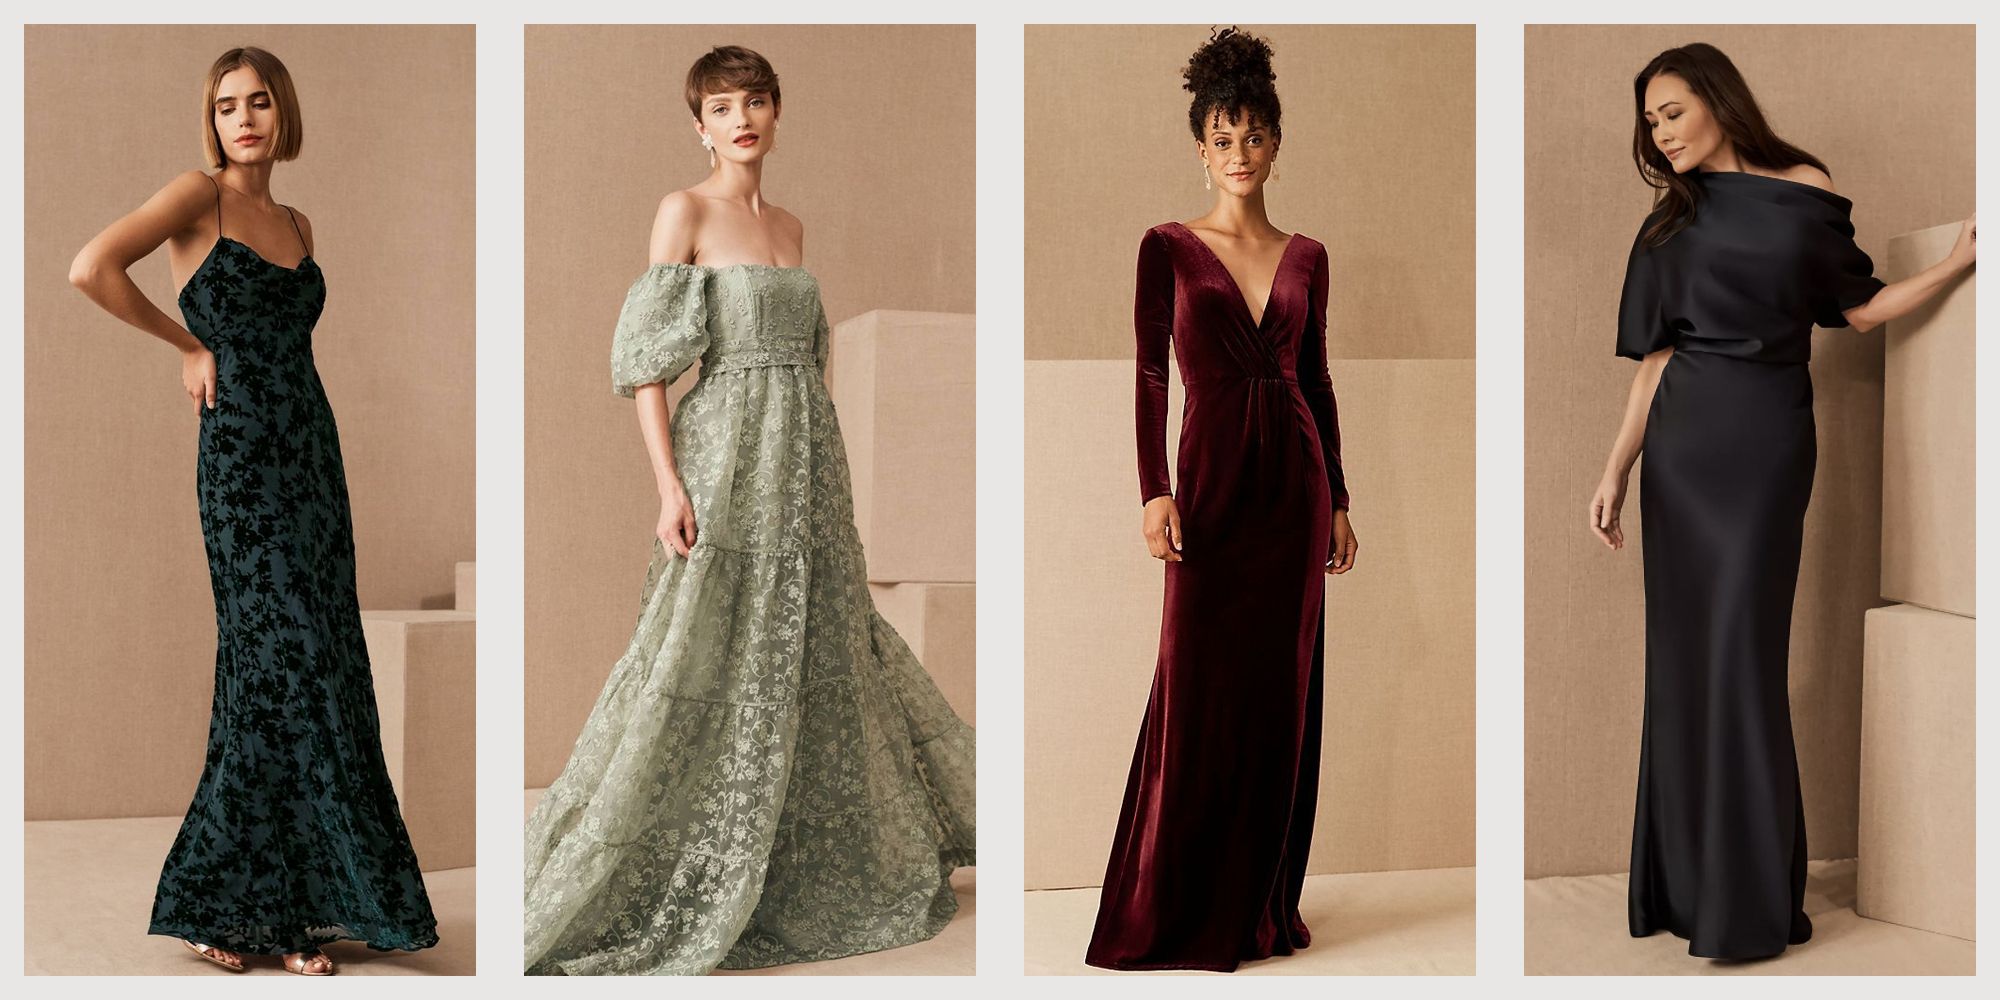 24 Fall Wedding Guest Dresses to Ensure You're a Stunning Attendee | Vogue